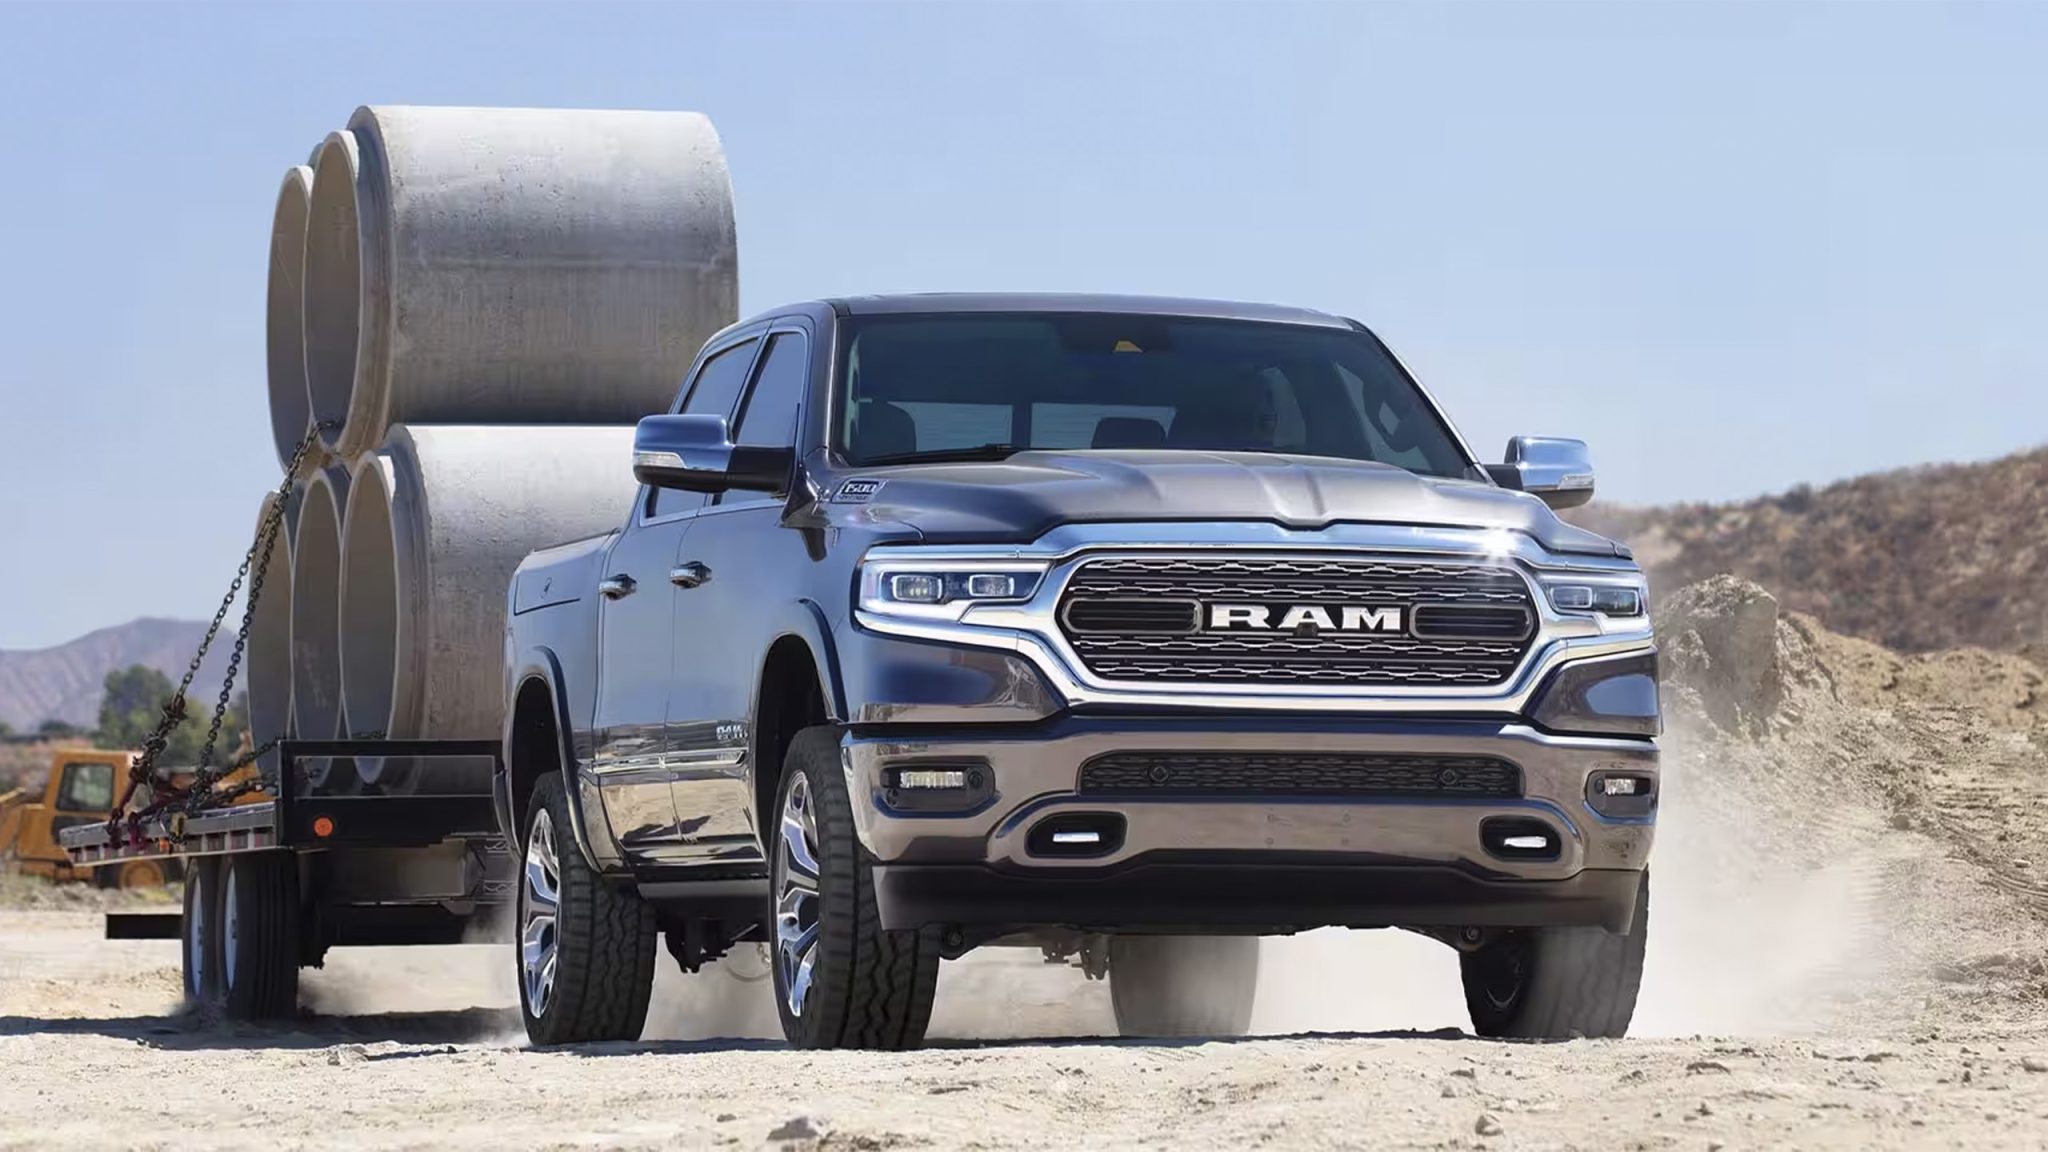 Front view of a 2023 grey Ram 1500 towing a heavy load